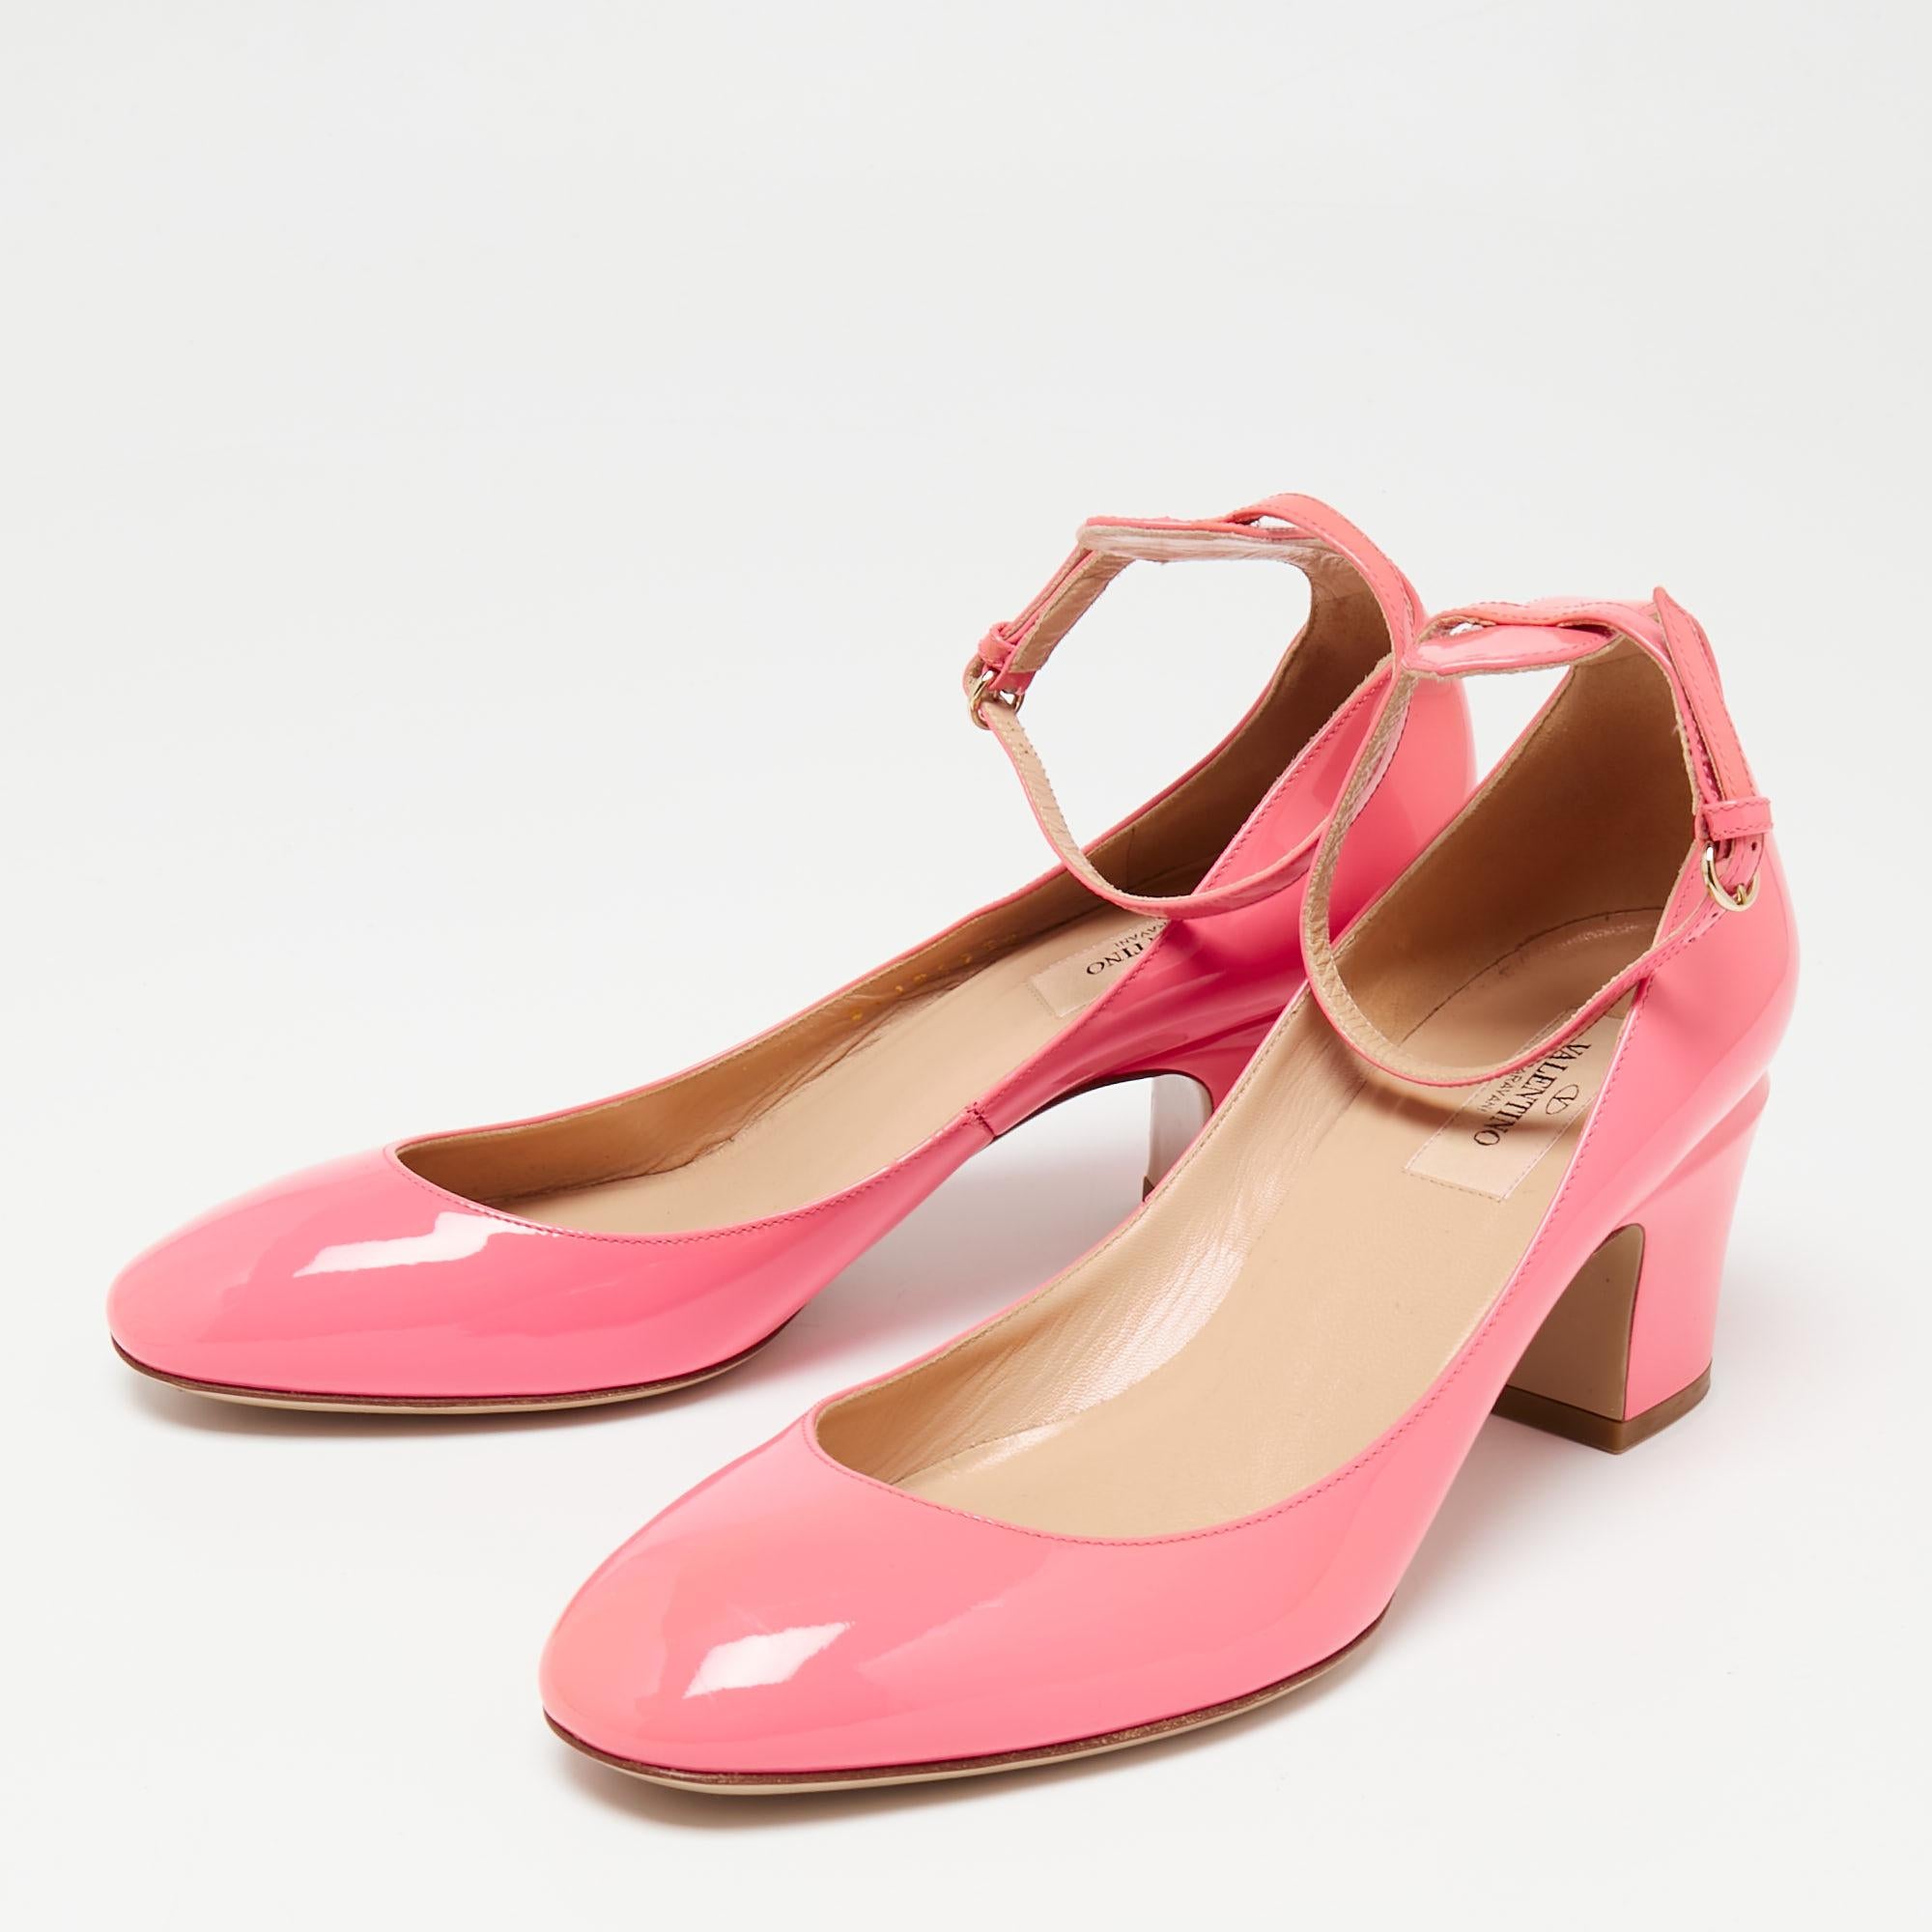 
Valentino is well-known for his graceful designs, and his label is synonymous with opulence, femininity, and elegance. Crafted out of patent leather, these pumps will add a luxe touch to your overall look. They feature covered toes, 7 cm heels, and